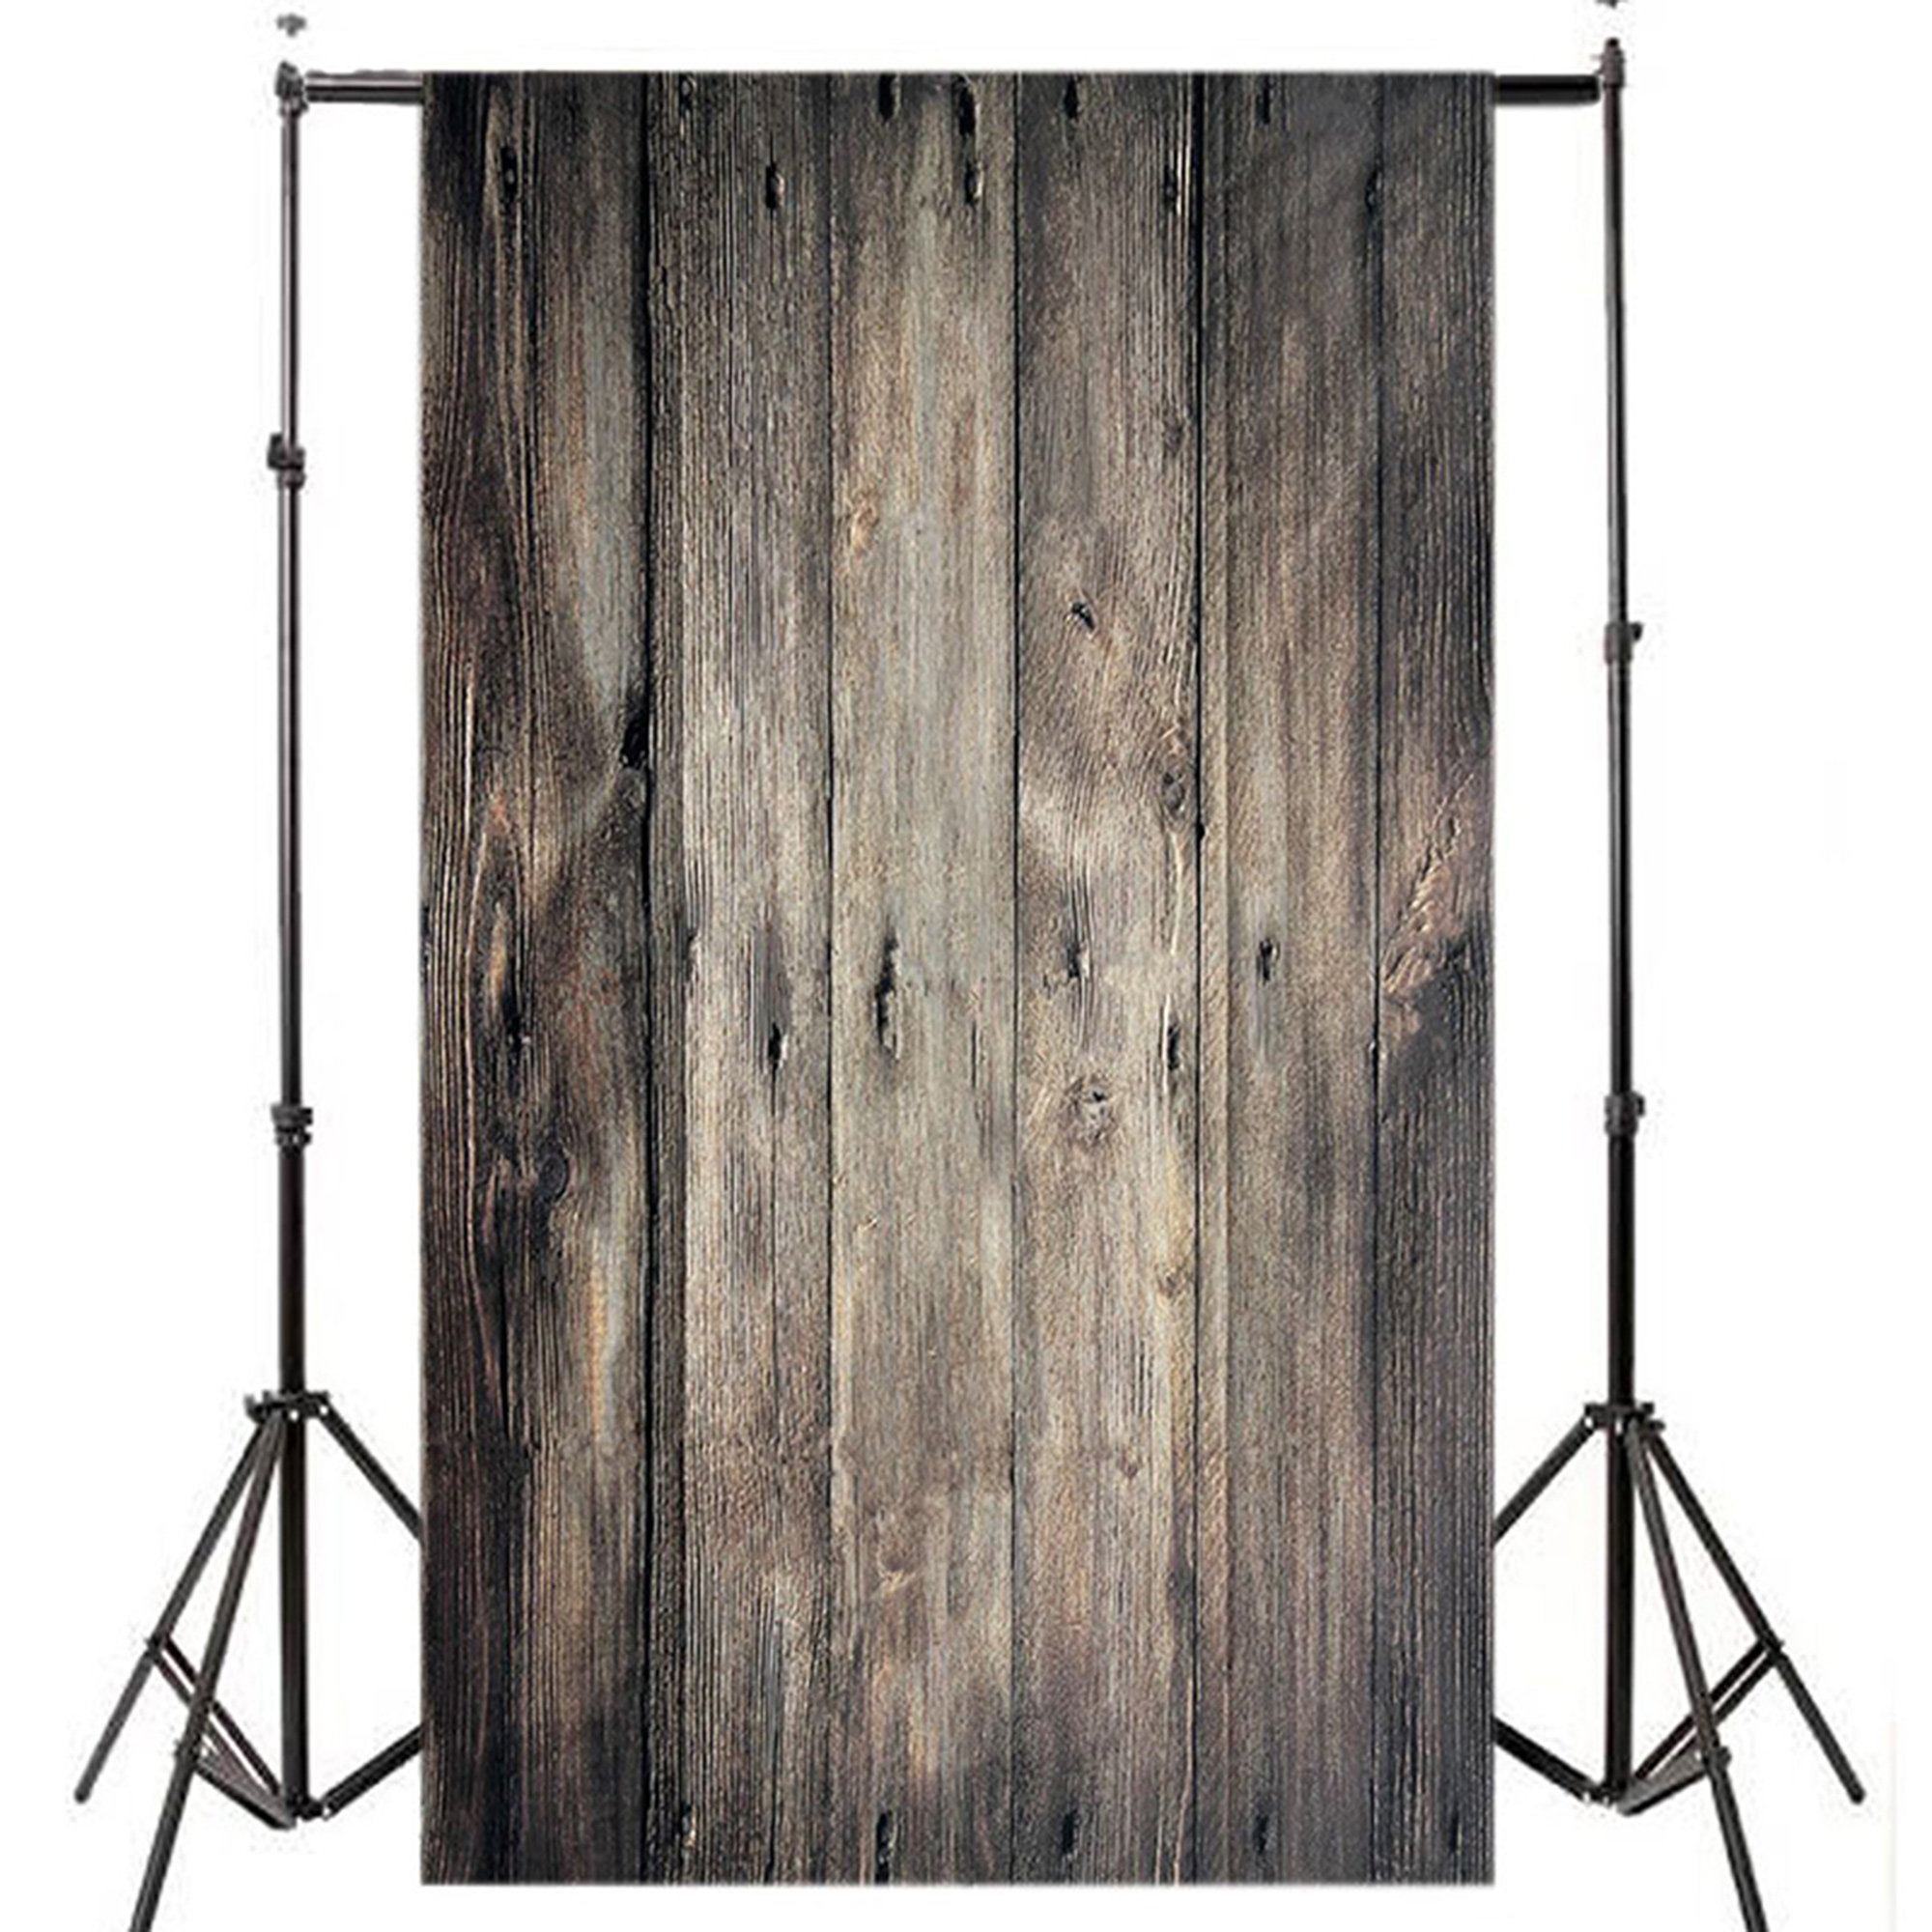 3X5ft Studio Photo Video Photography Backdrop Background Photo Booth Background Screen Props Photo Studio Props Vinyl Screen Studio Photo Props - image 4 of 4